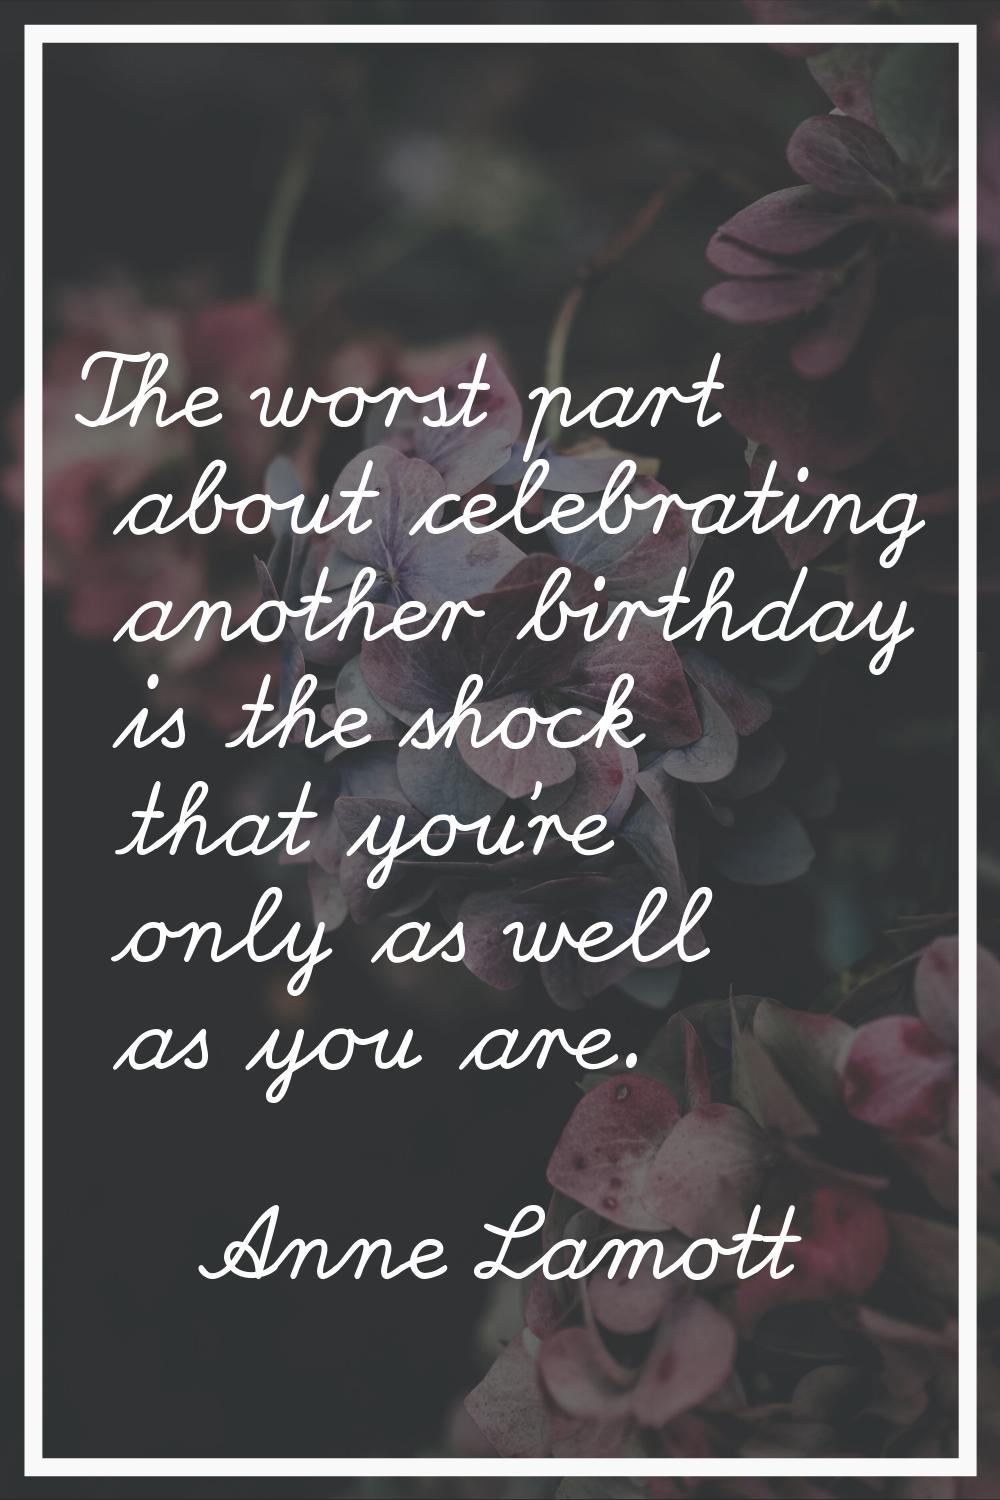 The worst part about celebrating another birthday is the shock that you're only as well as you are.